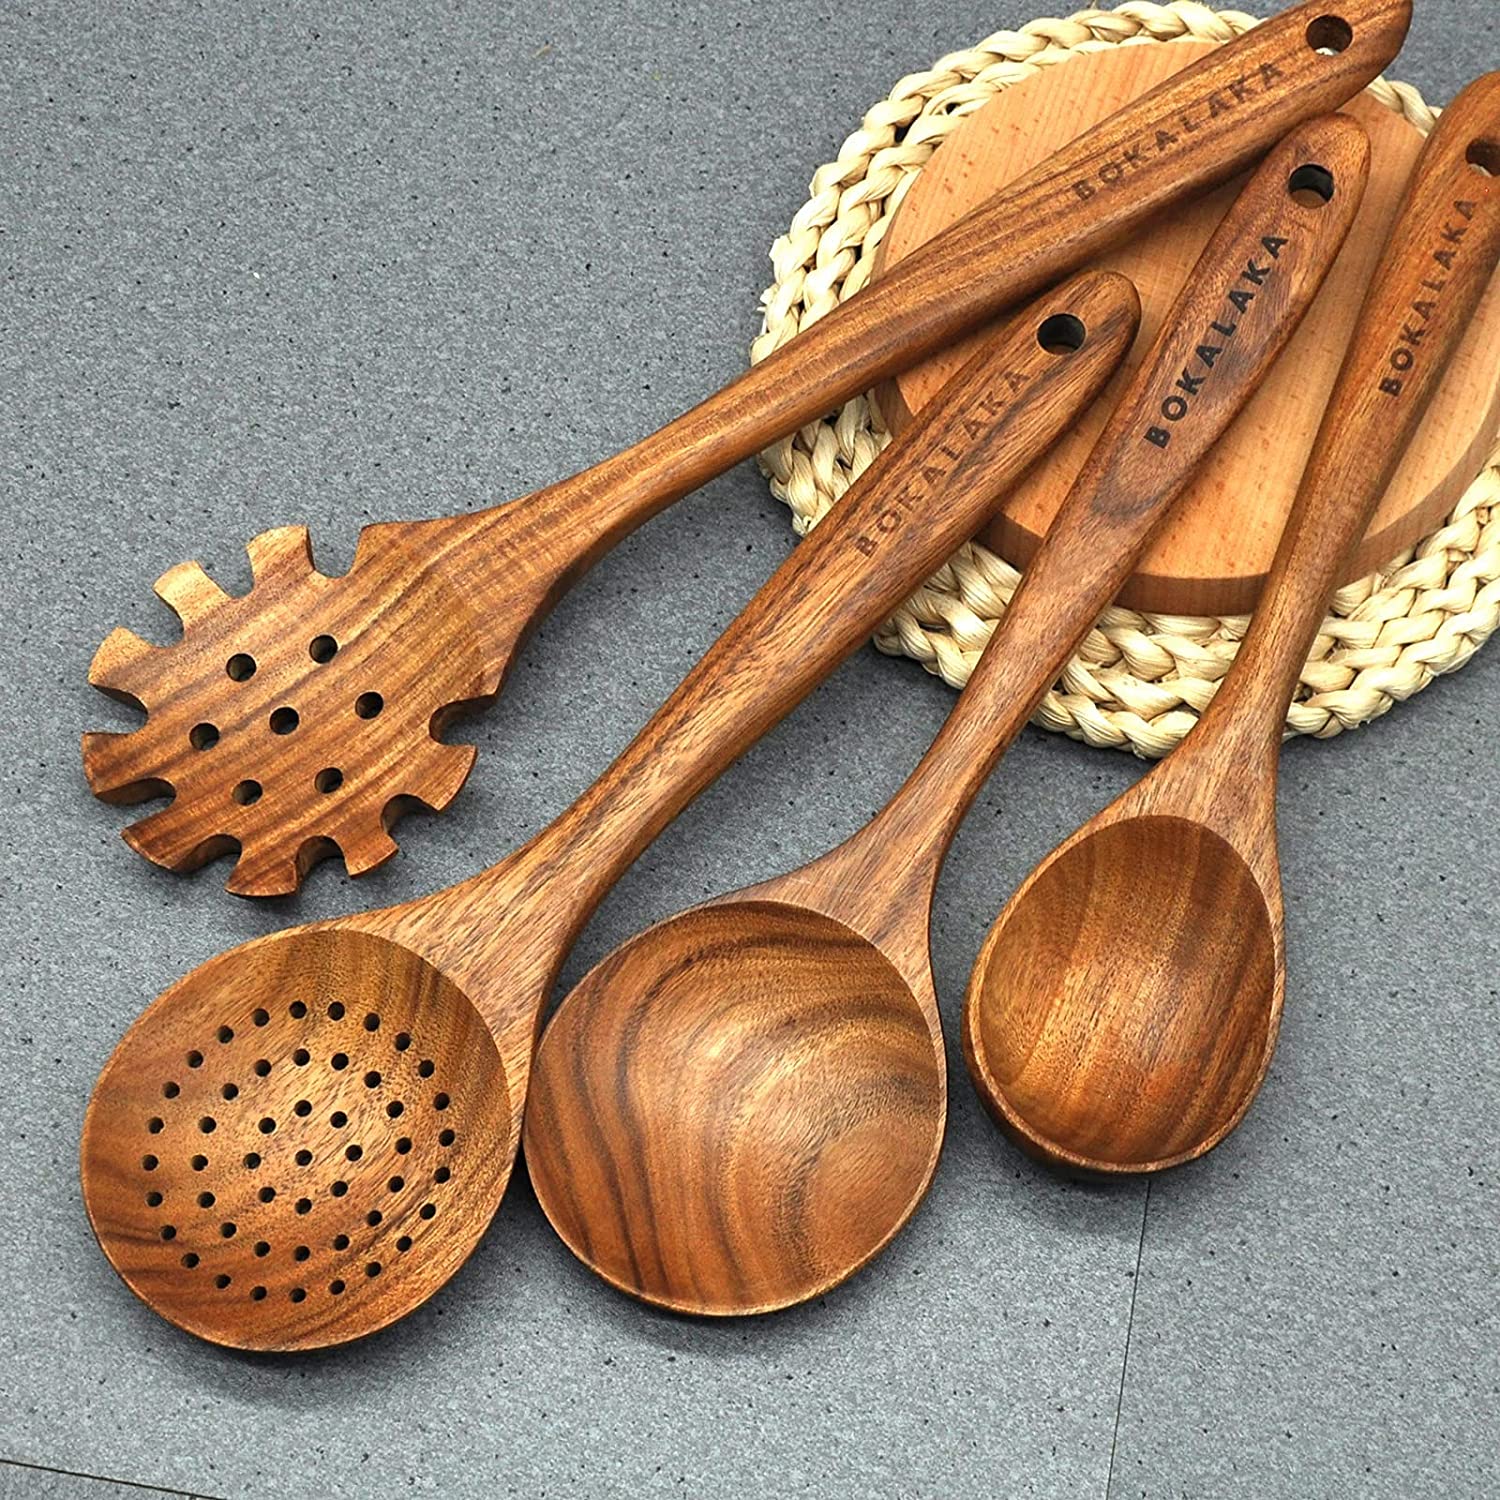 https://discounttoday.net/wp-content/uploads/2022/12/BOKALAKA-Wooden-Spoons-for-Cooking10-Pcs-Natural-Teak-Wooden-Kitchen-Utensils-Set-Wooden-Utensils-for-Cooking-Wooden-Cooking-Utensils-Wooden-Spatulas-for-Cooking5.jpg